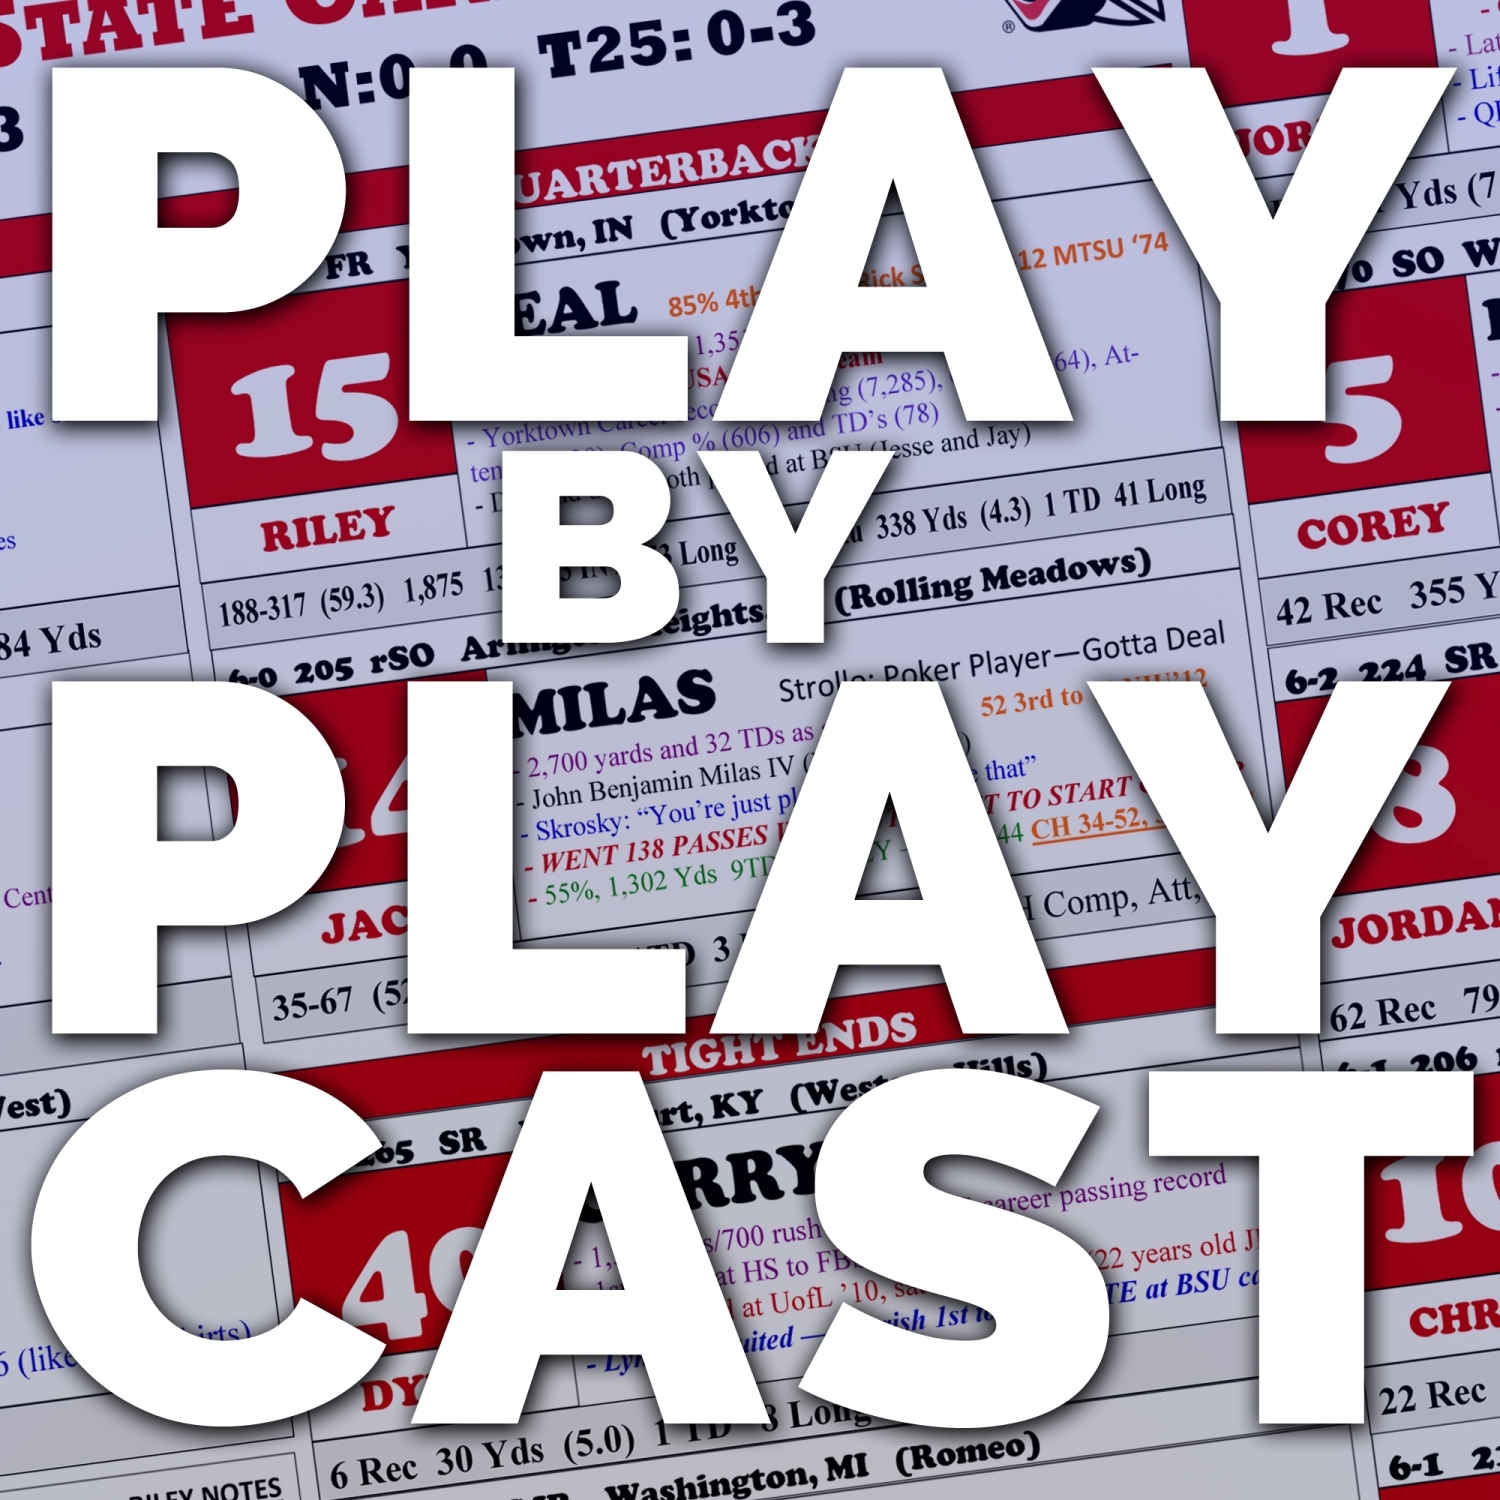 Play-by-Playcast Ep. 81 (Brian Estridge / TCU Horned Frogs)